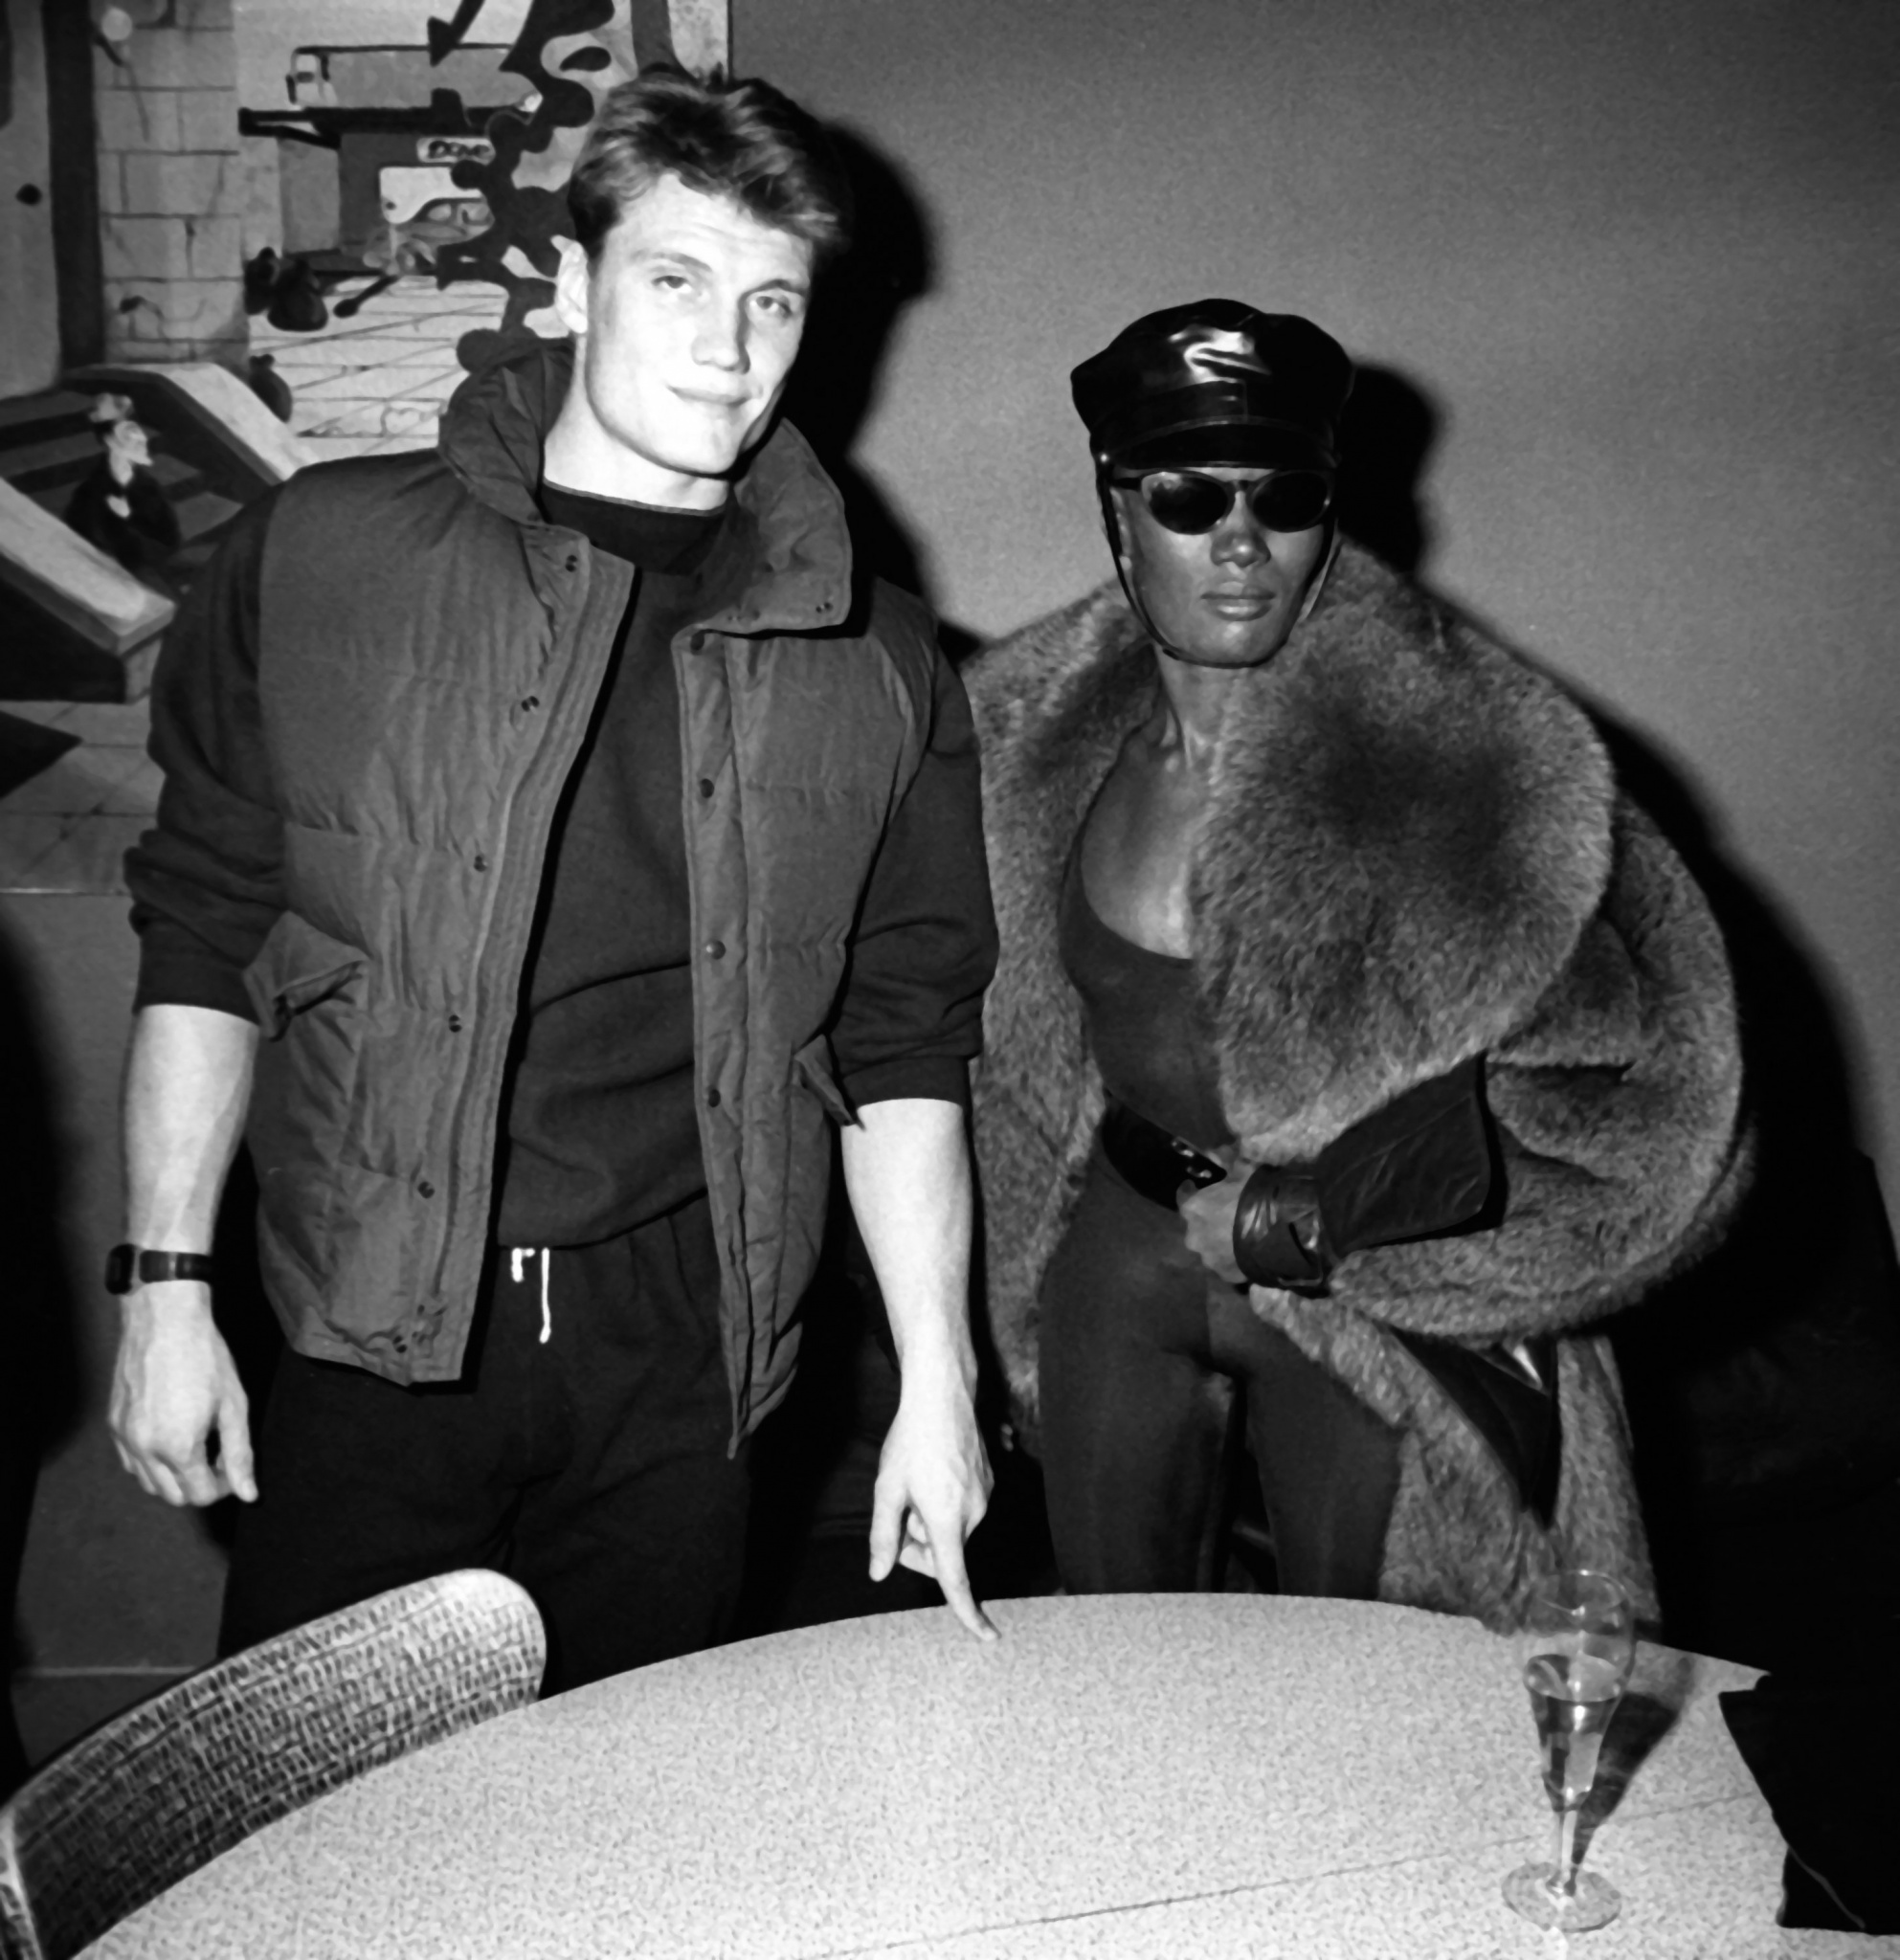 NEW YORK CITY - DECEMBER 31: Dolph Lundgren and Grace Jones attend Dolph Lundgren on December 31, 1983 at Kamikaze Club in New York City. (Photo by )